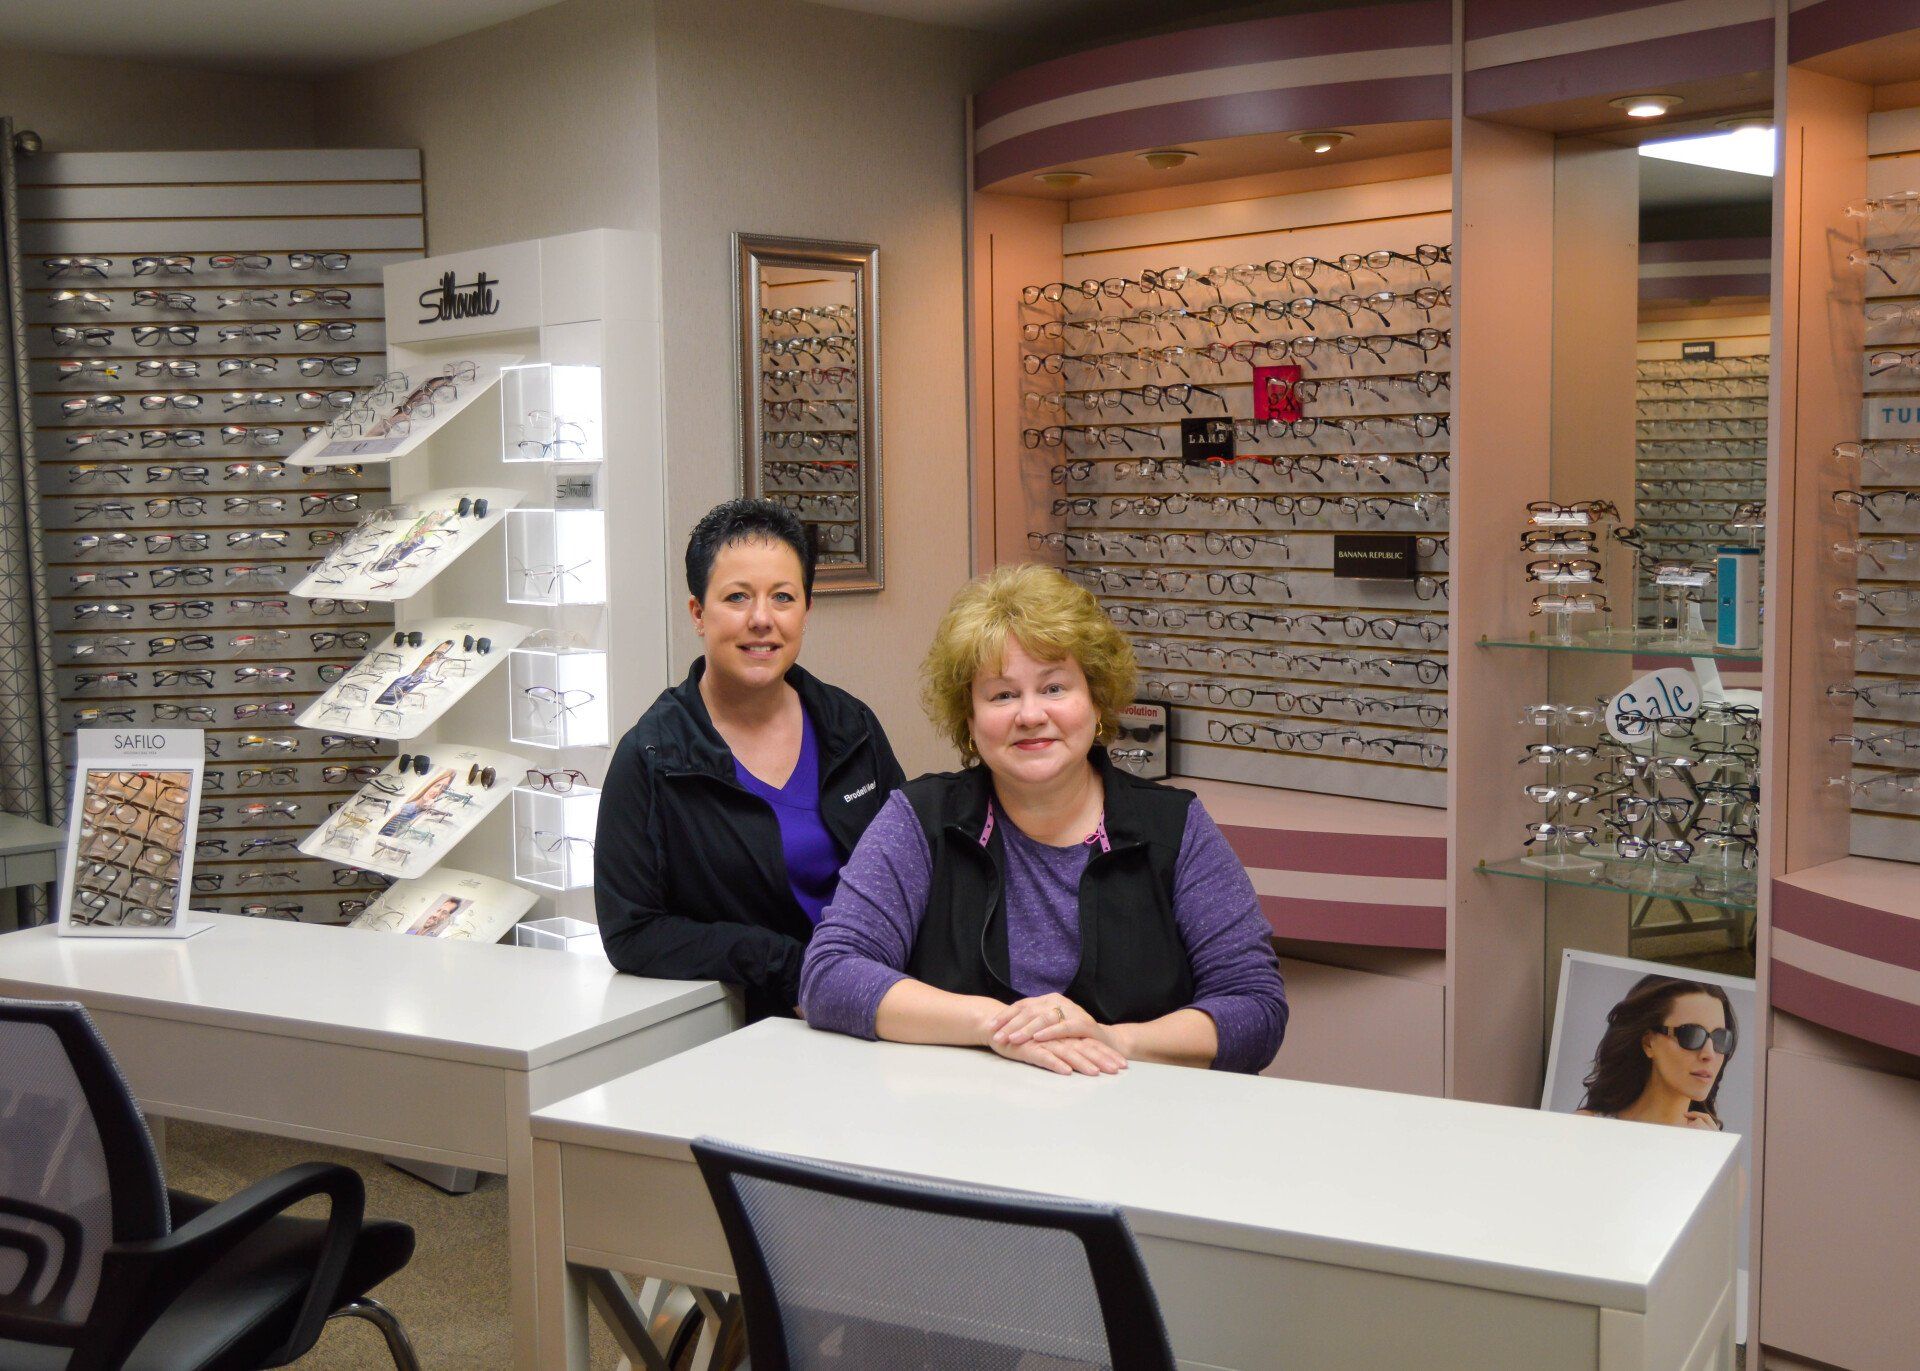 Vision with Style - Brodell Medical, Inc. in Warren, Ohio